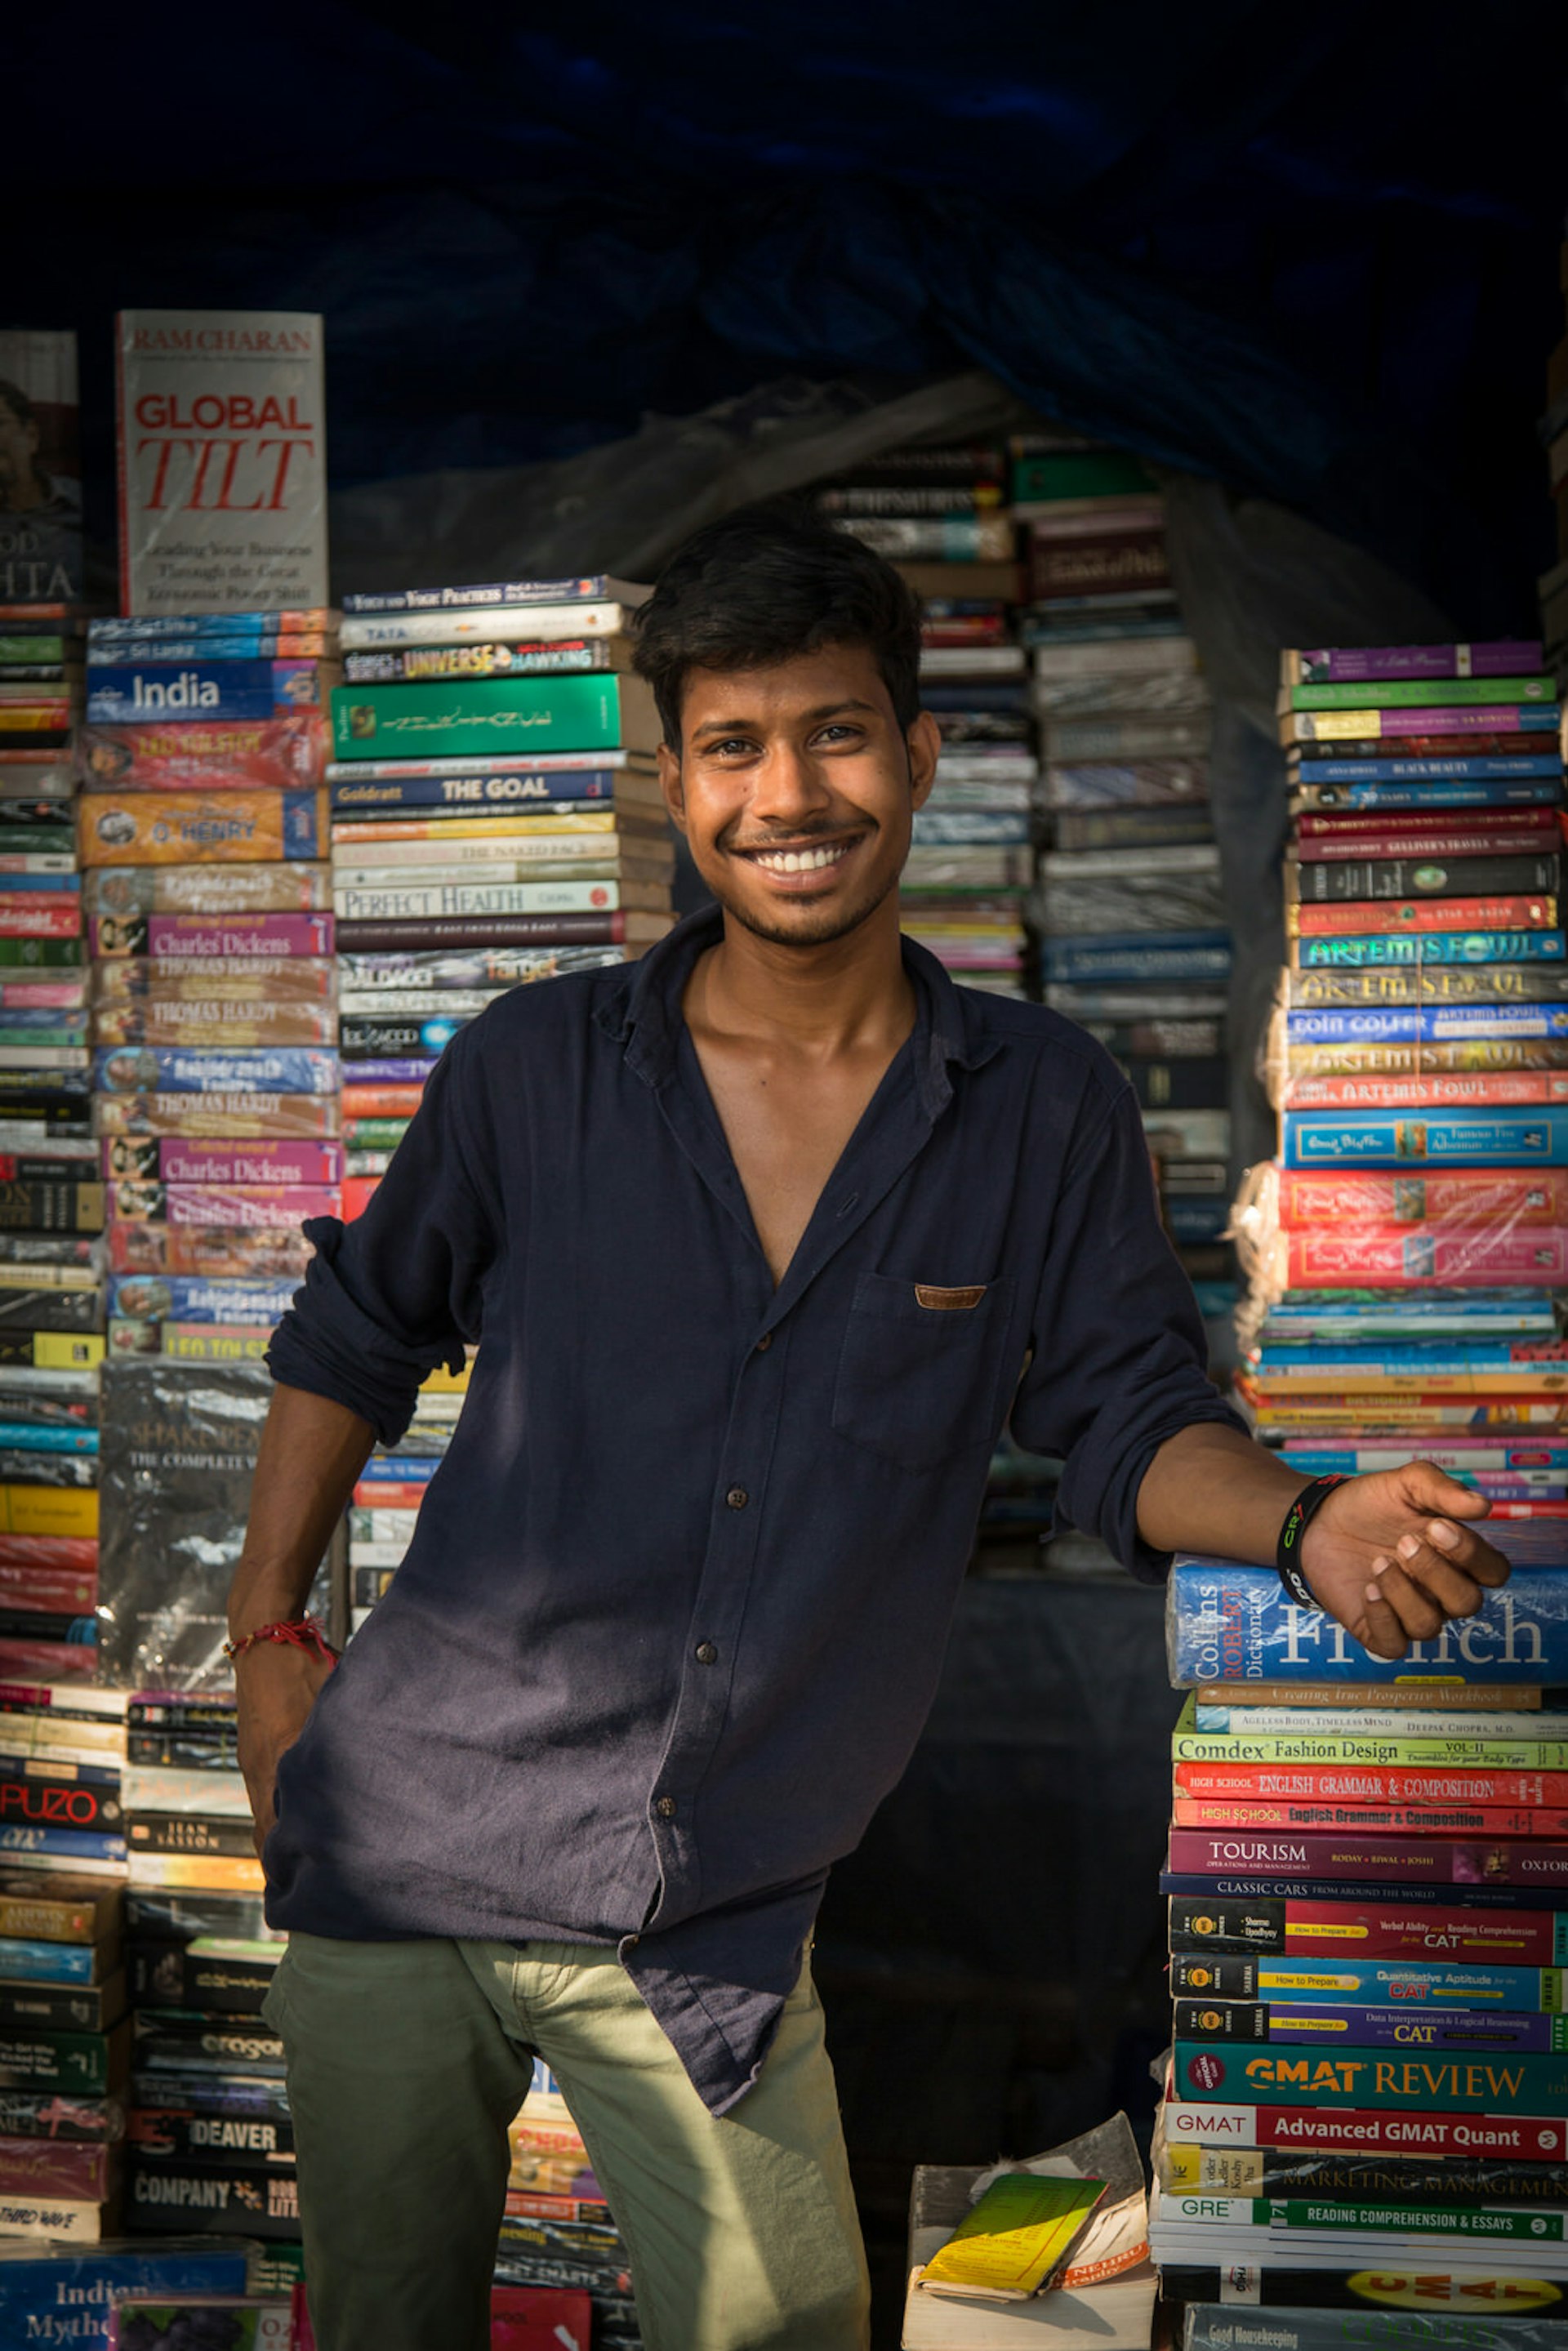 Sachin Roy, a bookseller, at his stall on Hutatma Chowk © Philip Lee Harvey / Lonely Planet